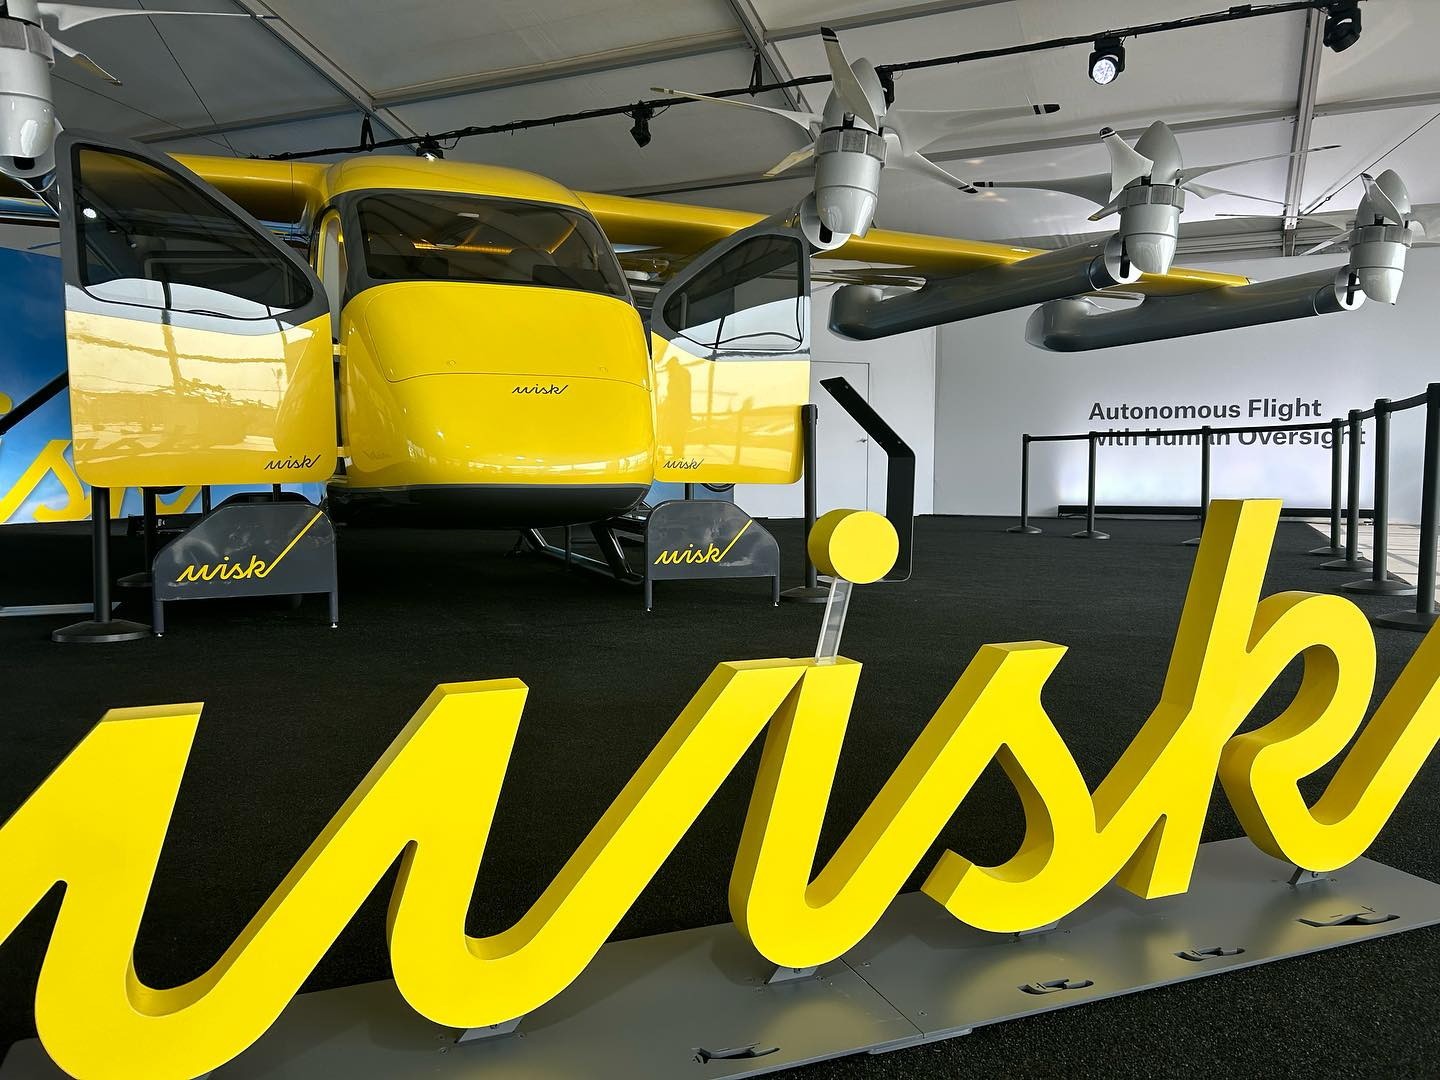 Wisk's Gen 6 Air Taxi Writes History at the EAA AirVenture Oshkosh ...